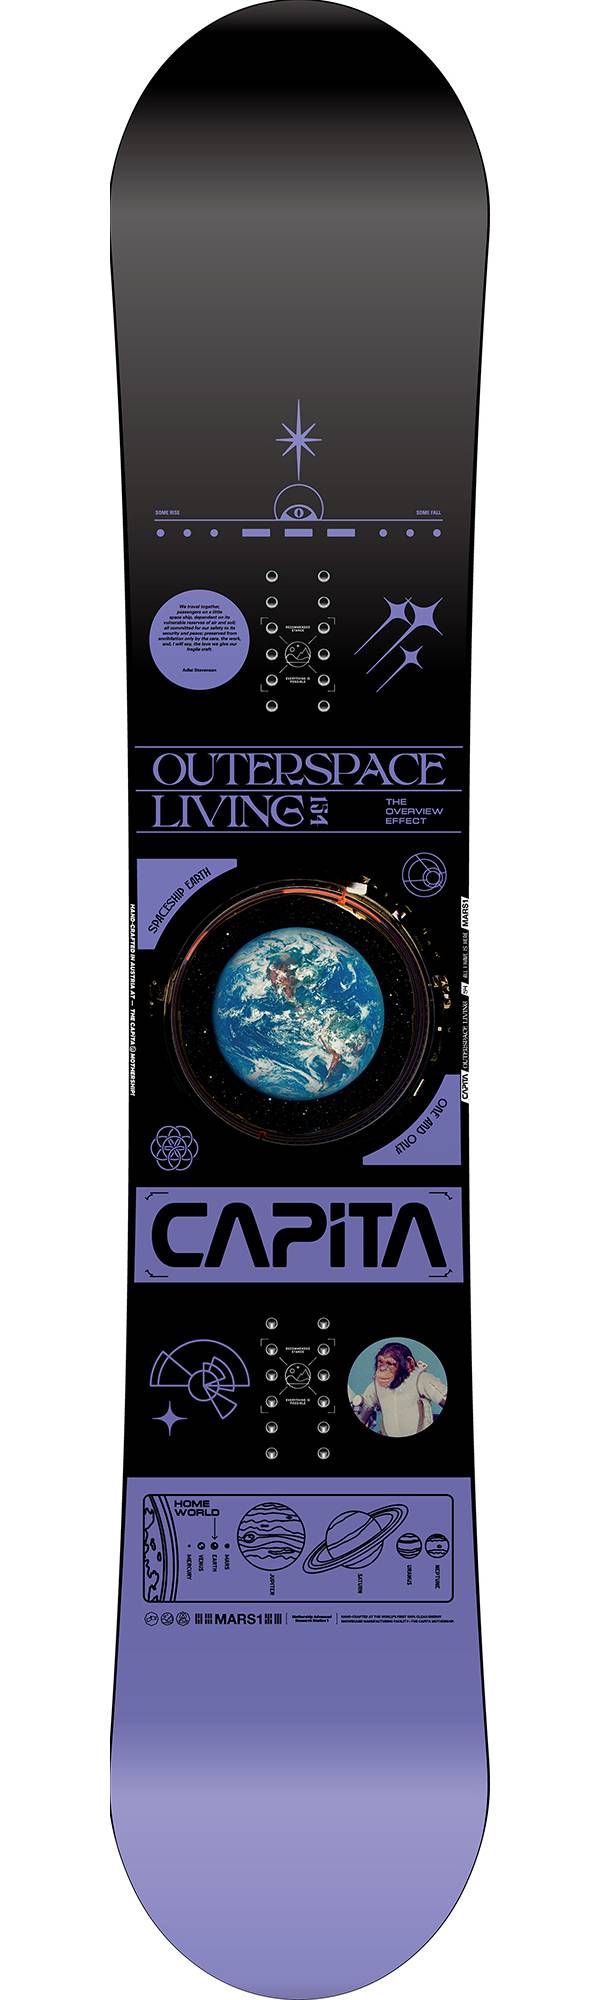 CAPiTA Outerspace Living Snowboard product image